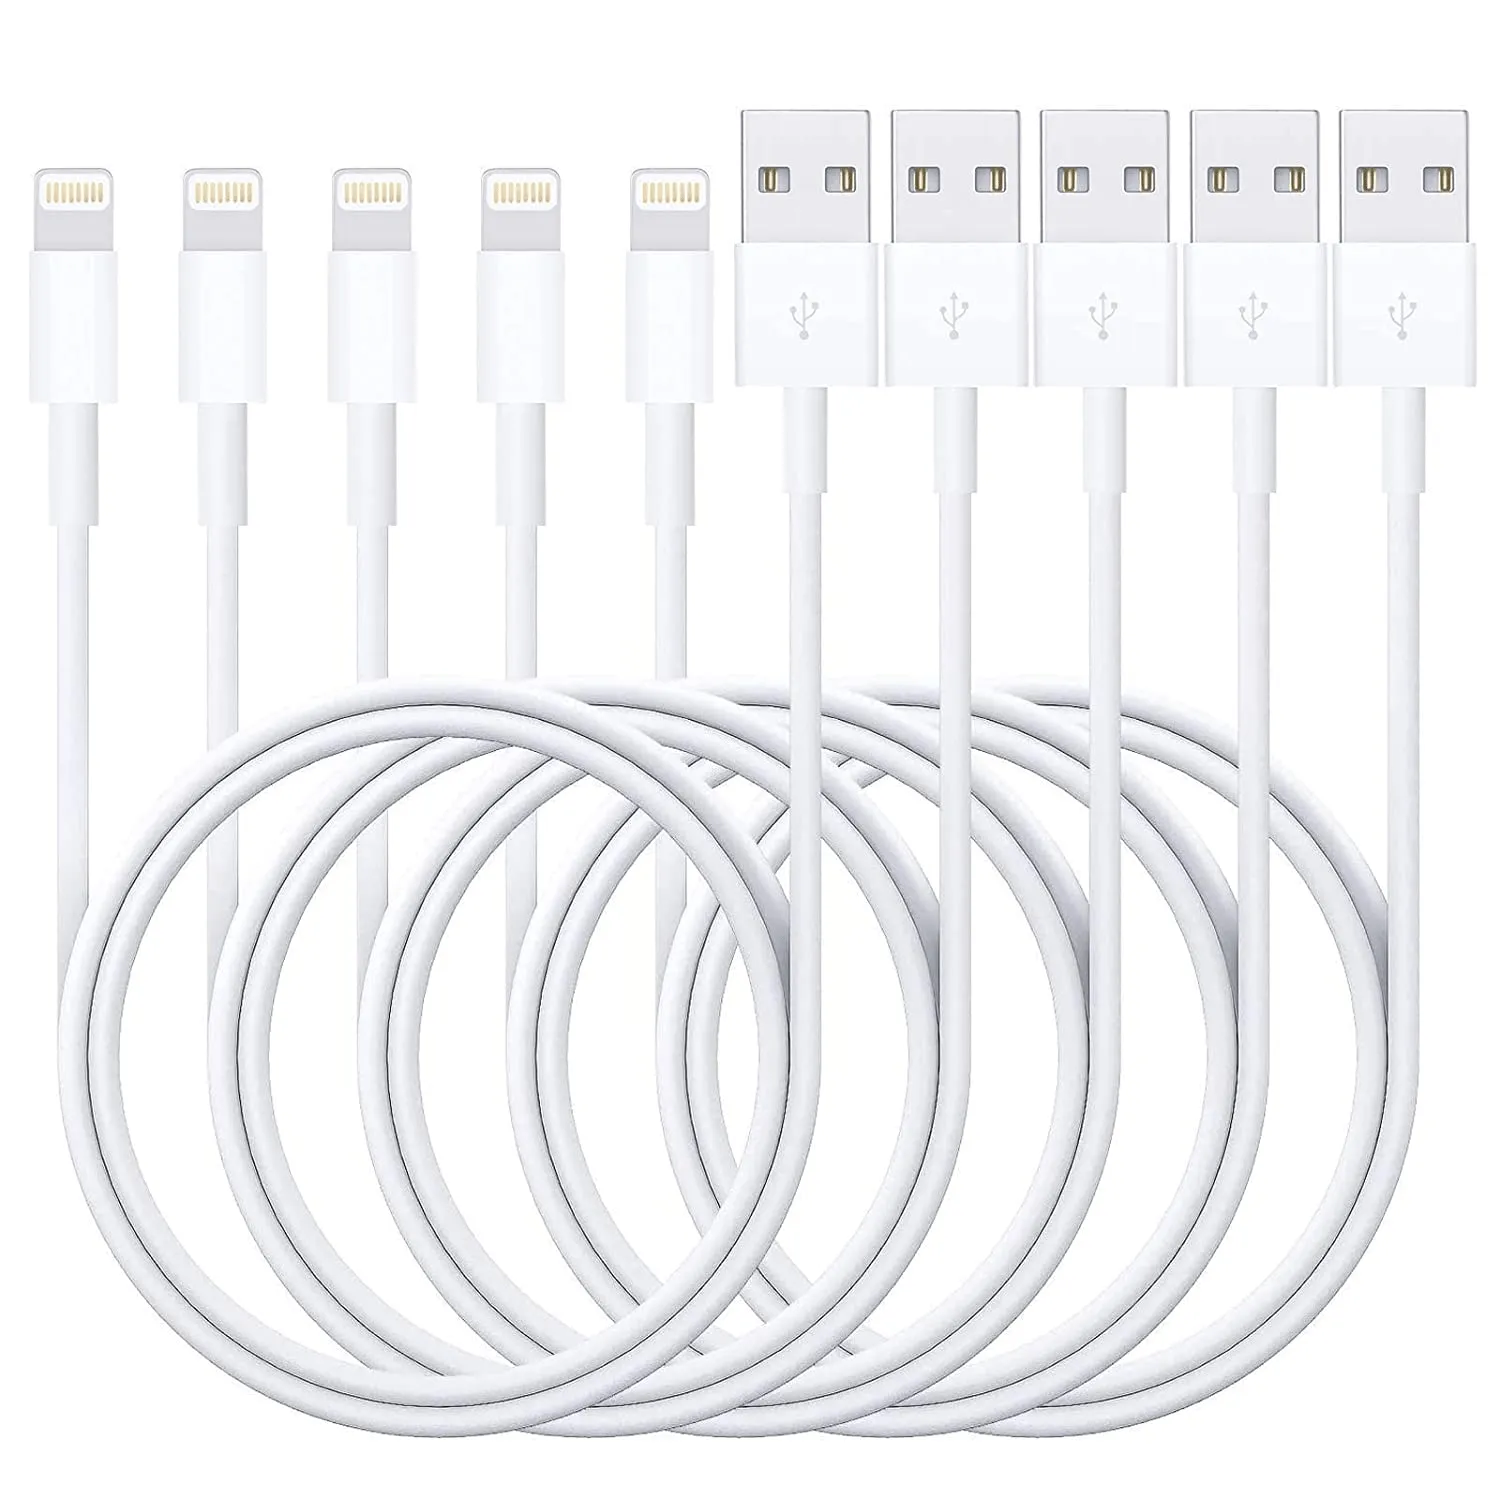 iPhone Charger Cable, 5Pack